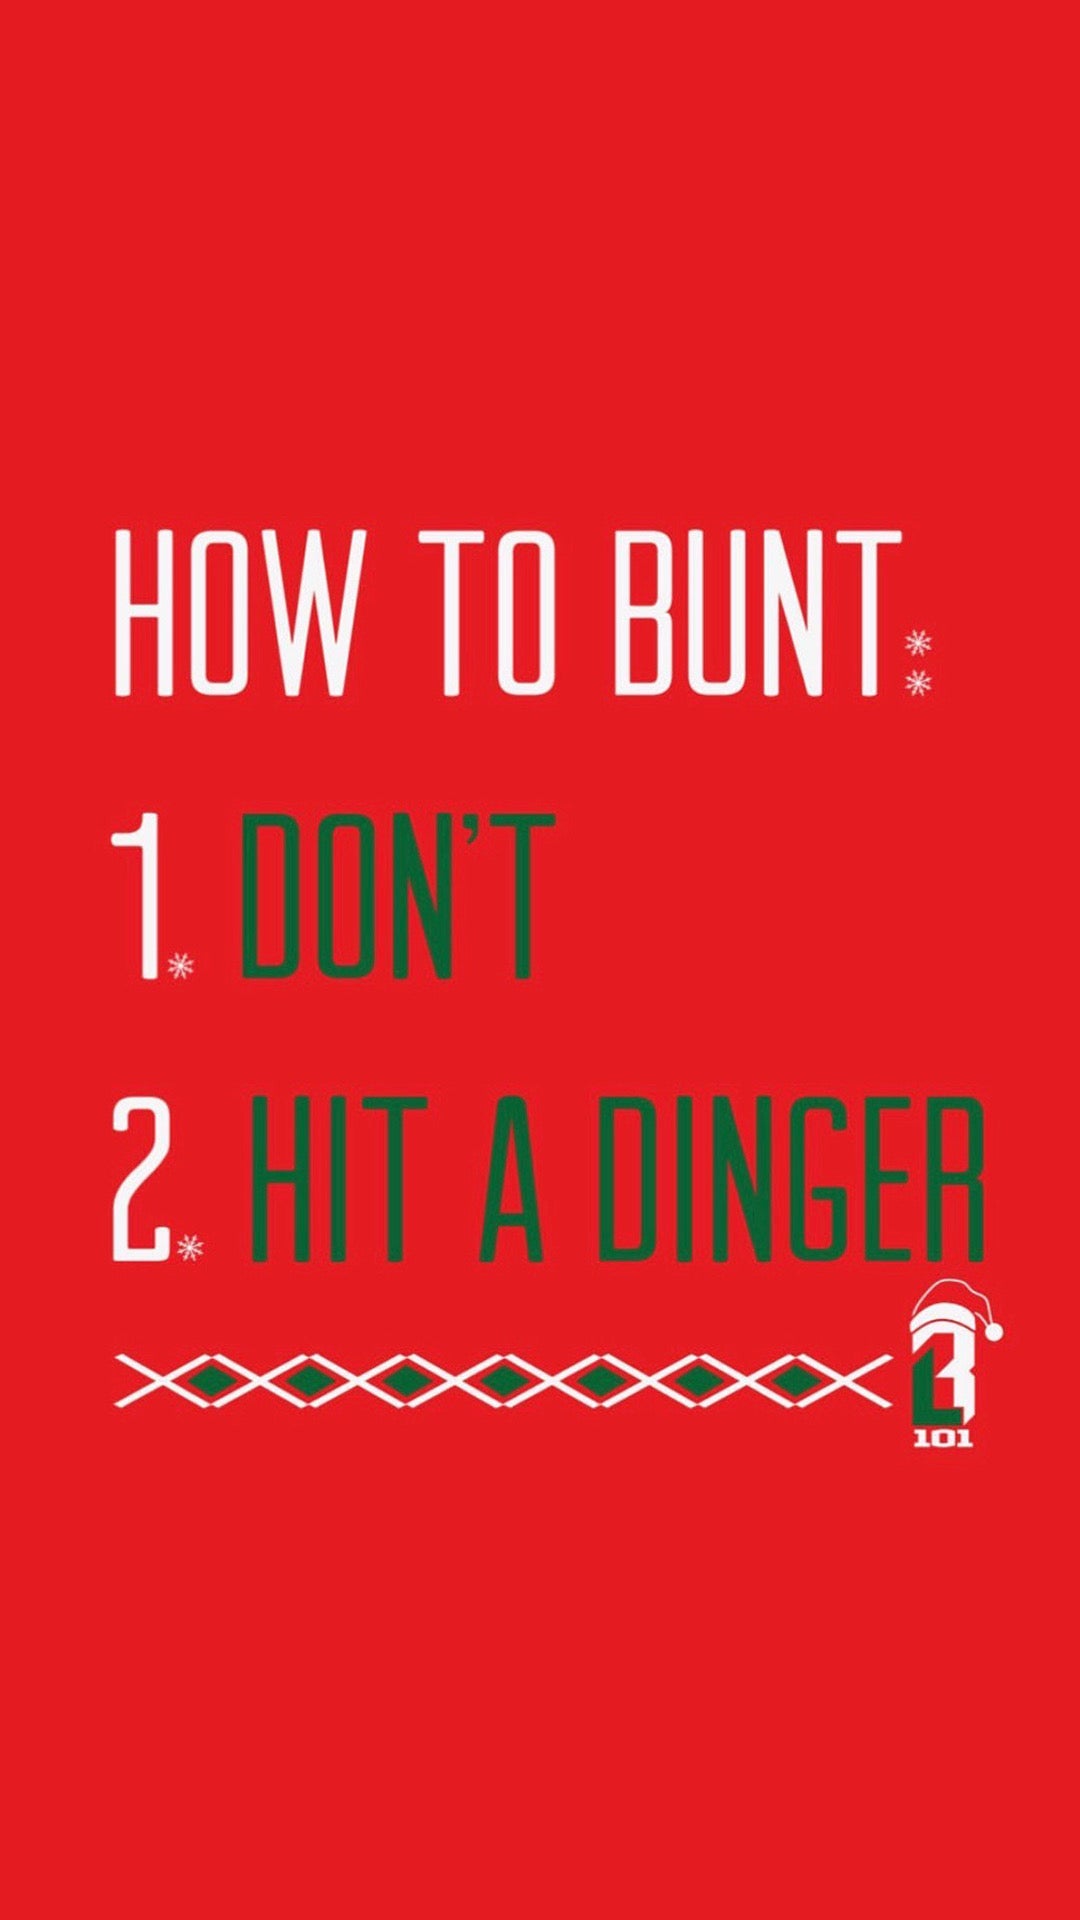 Wallpaper Wednesday - Holiday How To Bunt